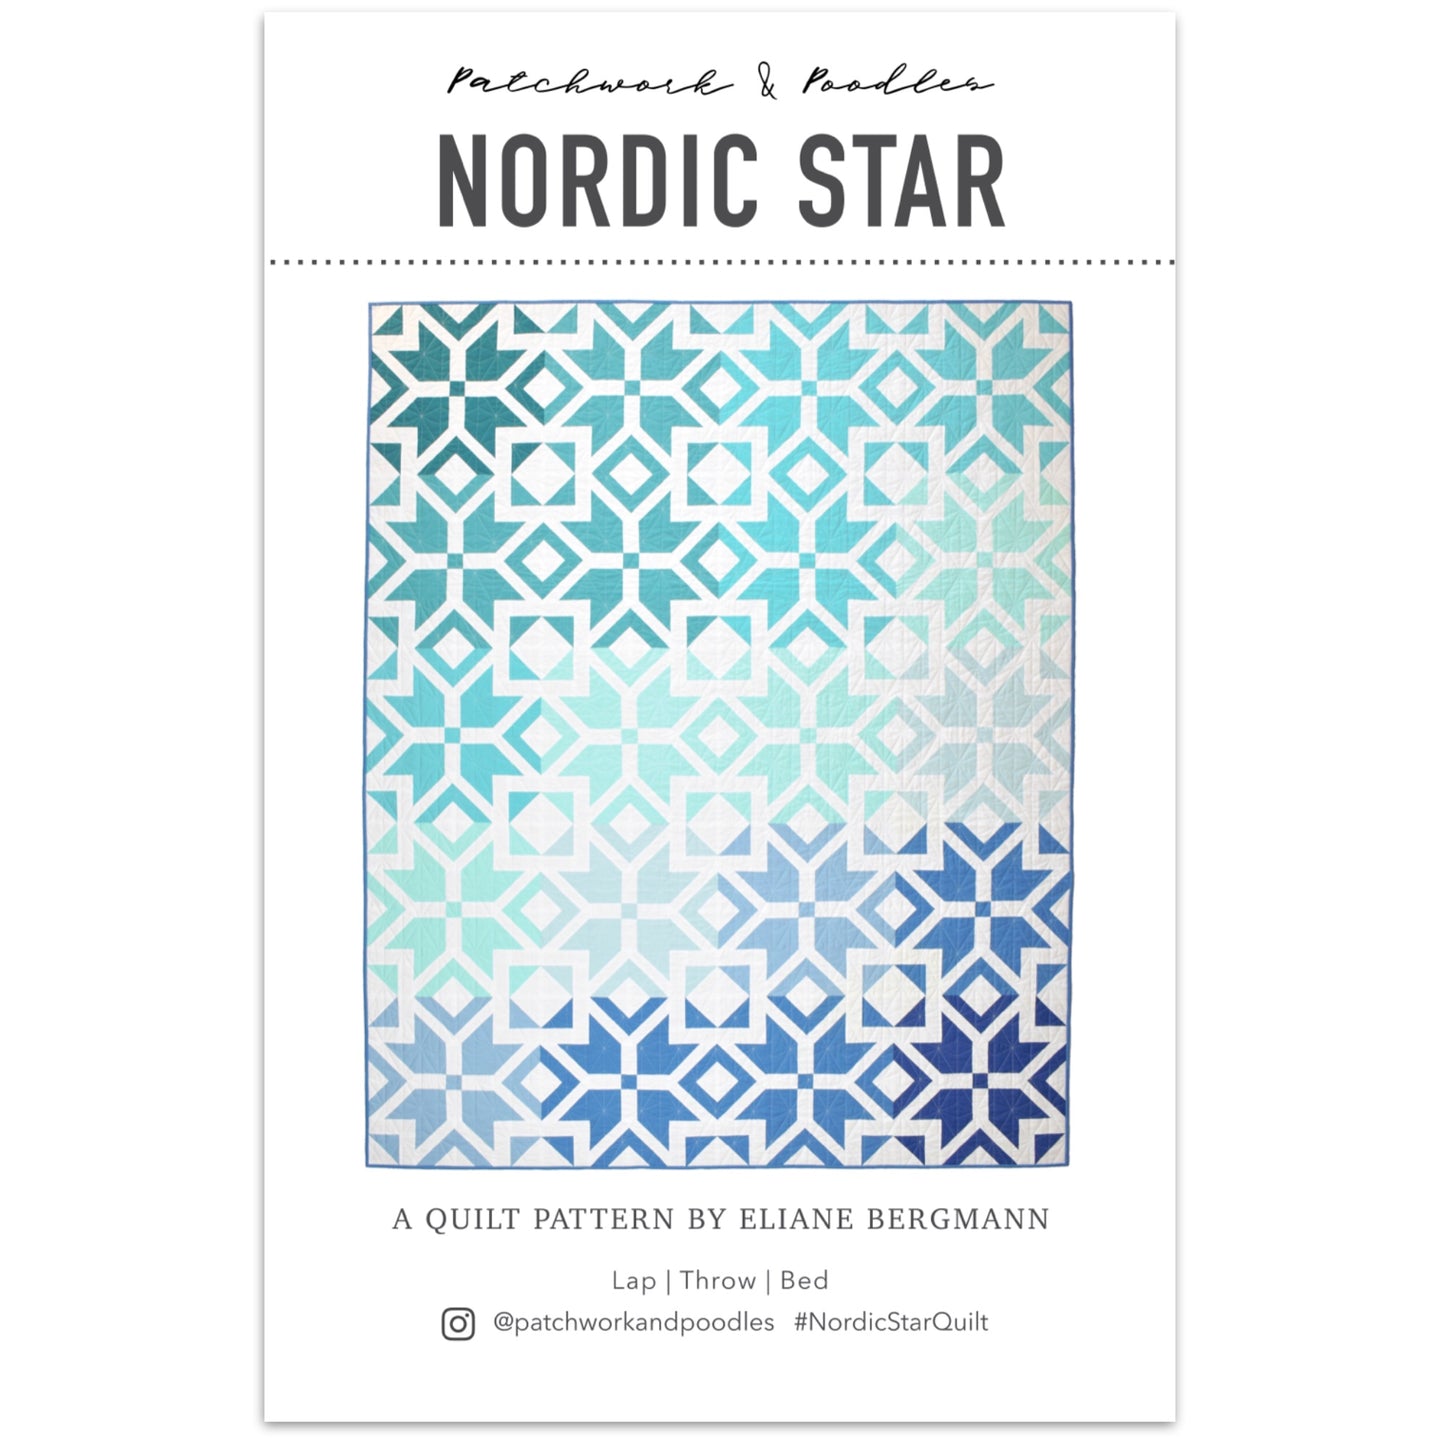 Patchwork and Poodles - Nordic Star Quilt Pattern